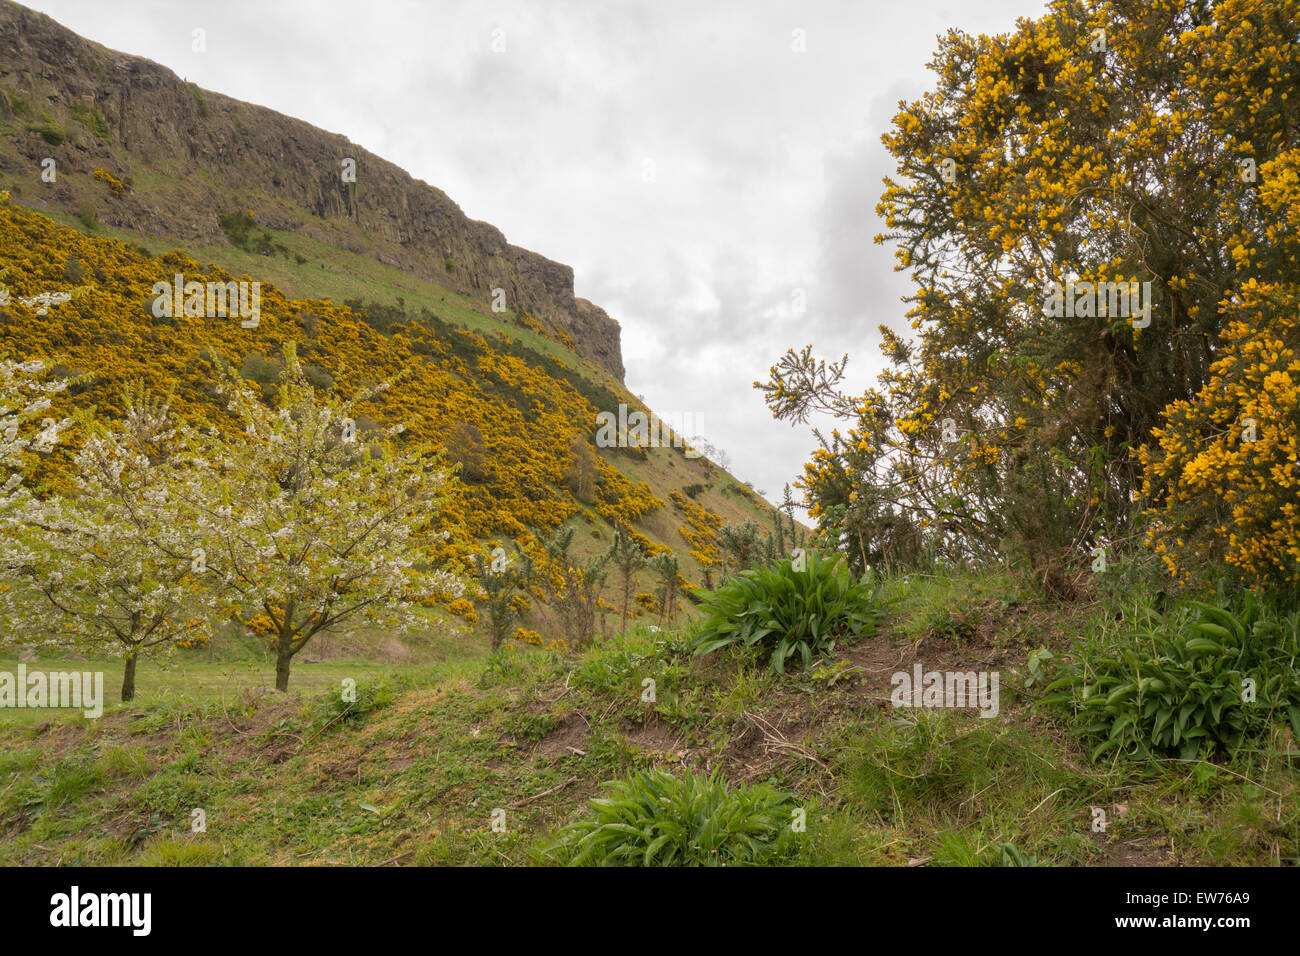 Gorse (Ulex) covering The Salisbury Crags in the middle of Holyrood Park, Edinburgh, Scotland, UK Stock Photo